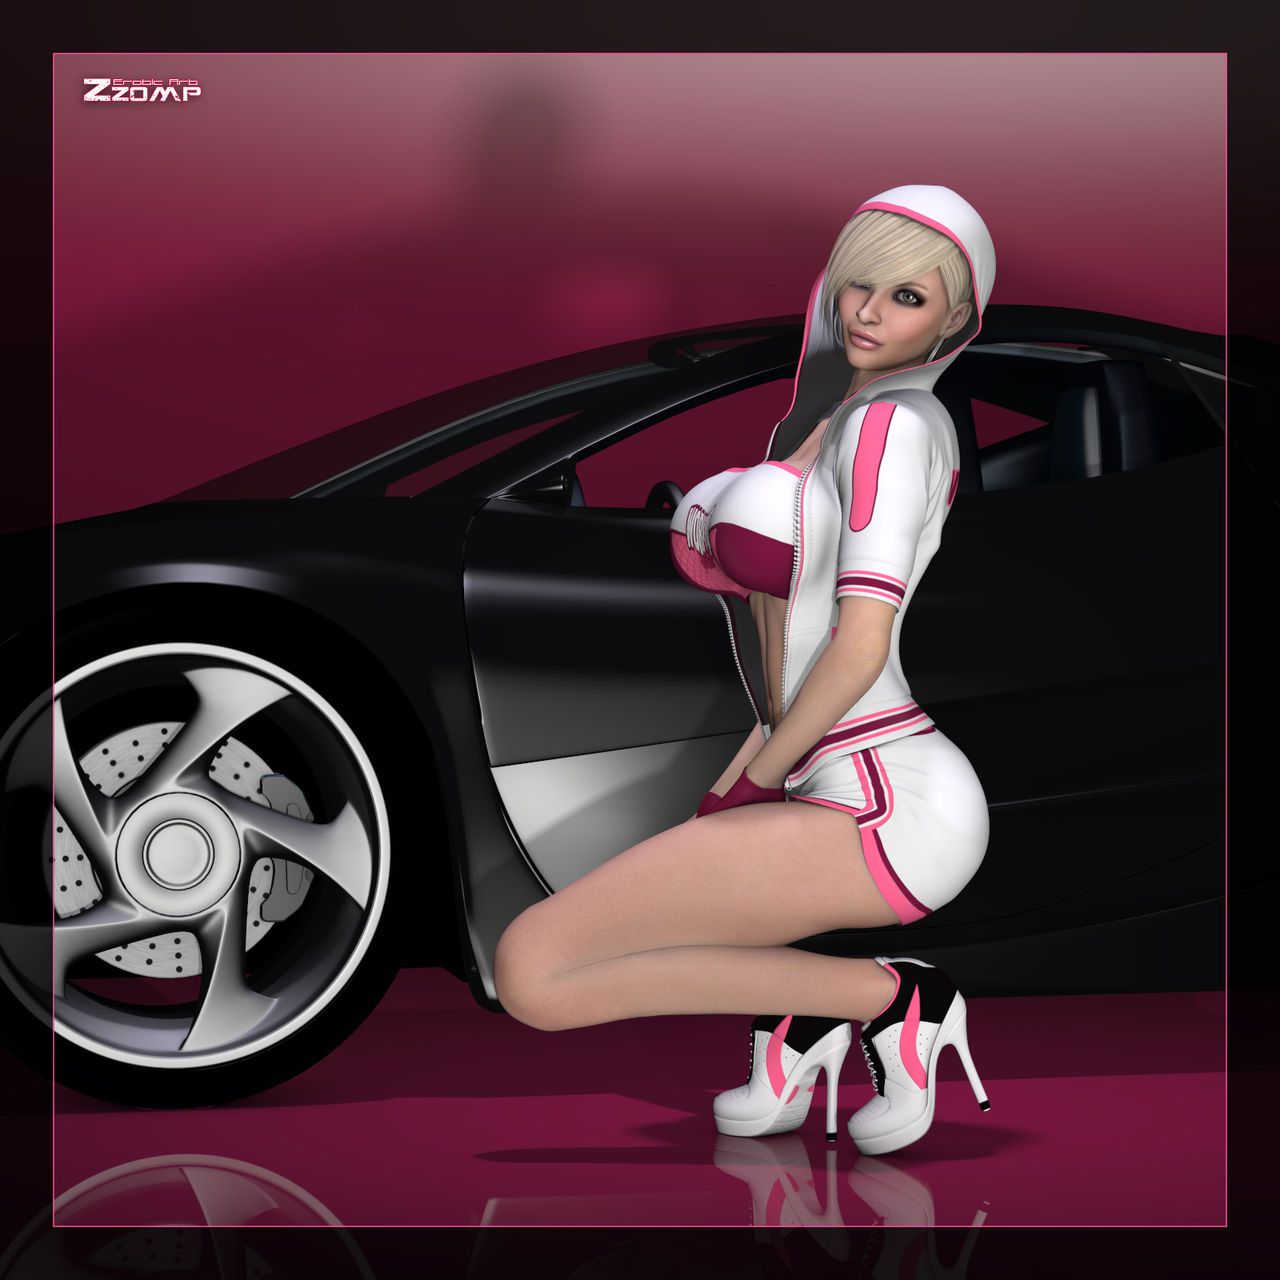 [Zzomp] MCB CarShow Chick 2